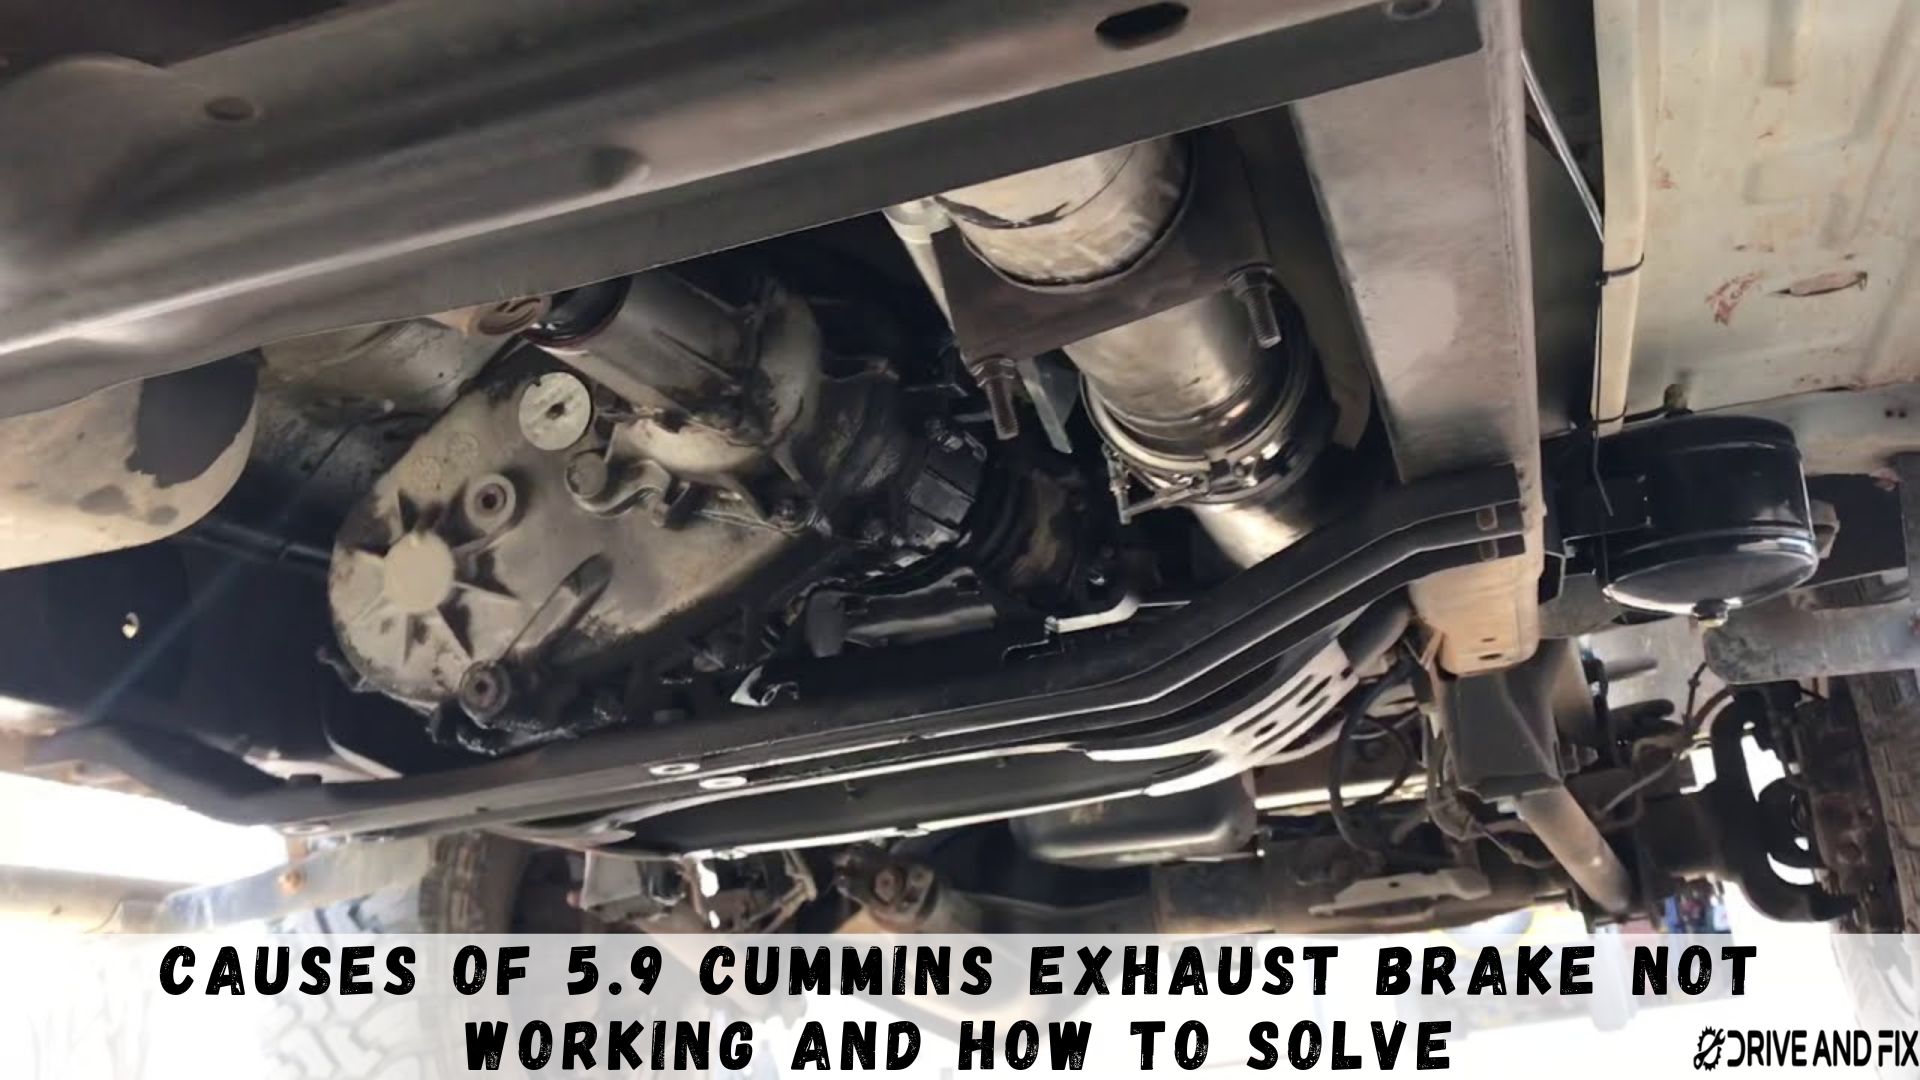 Causes of 5.9 Cummins Exhaust Brake Not Working And How To Solve